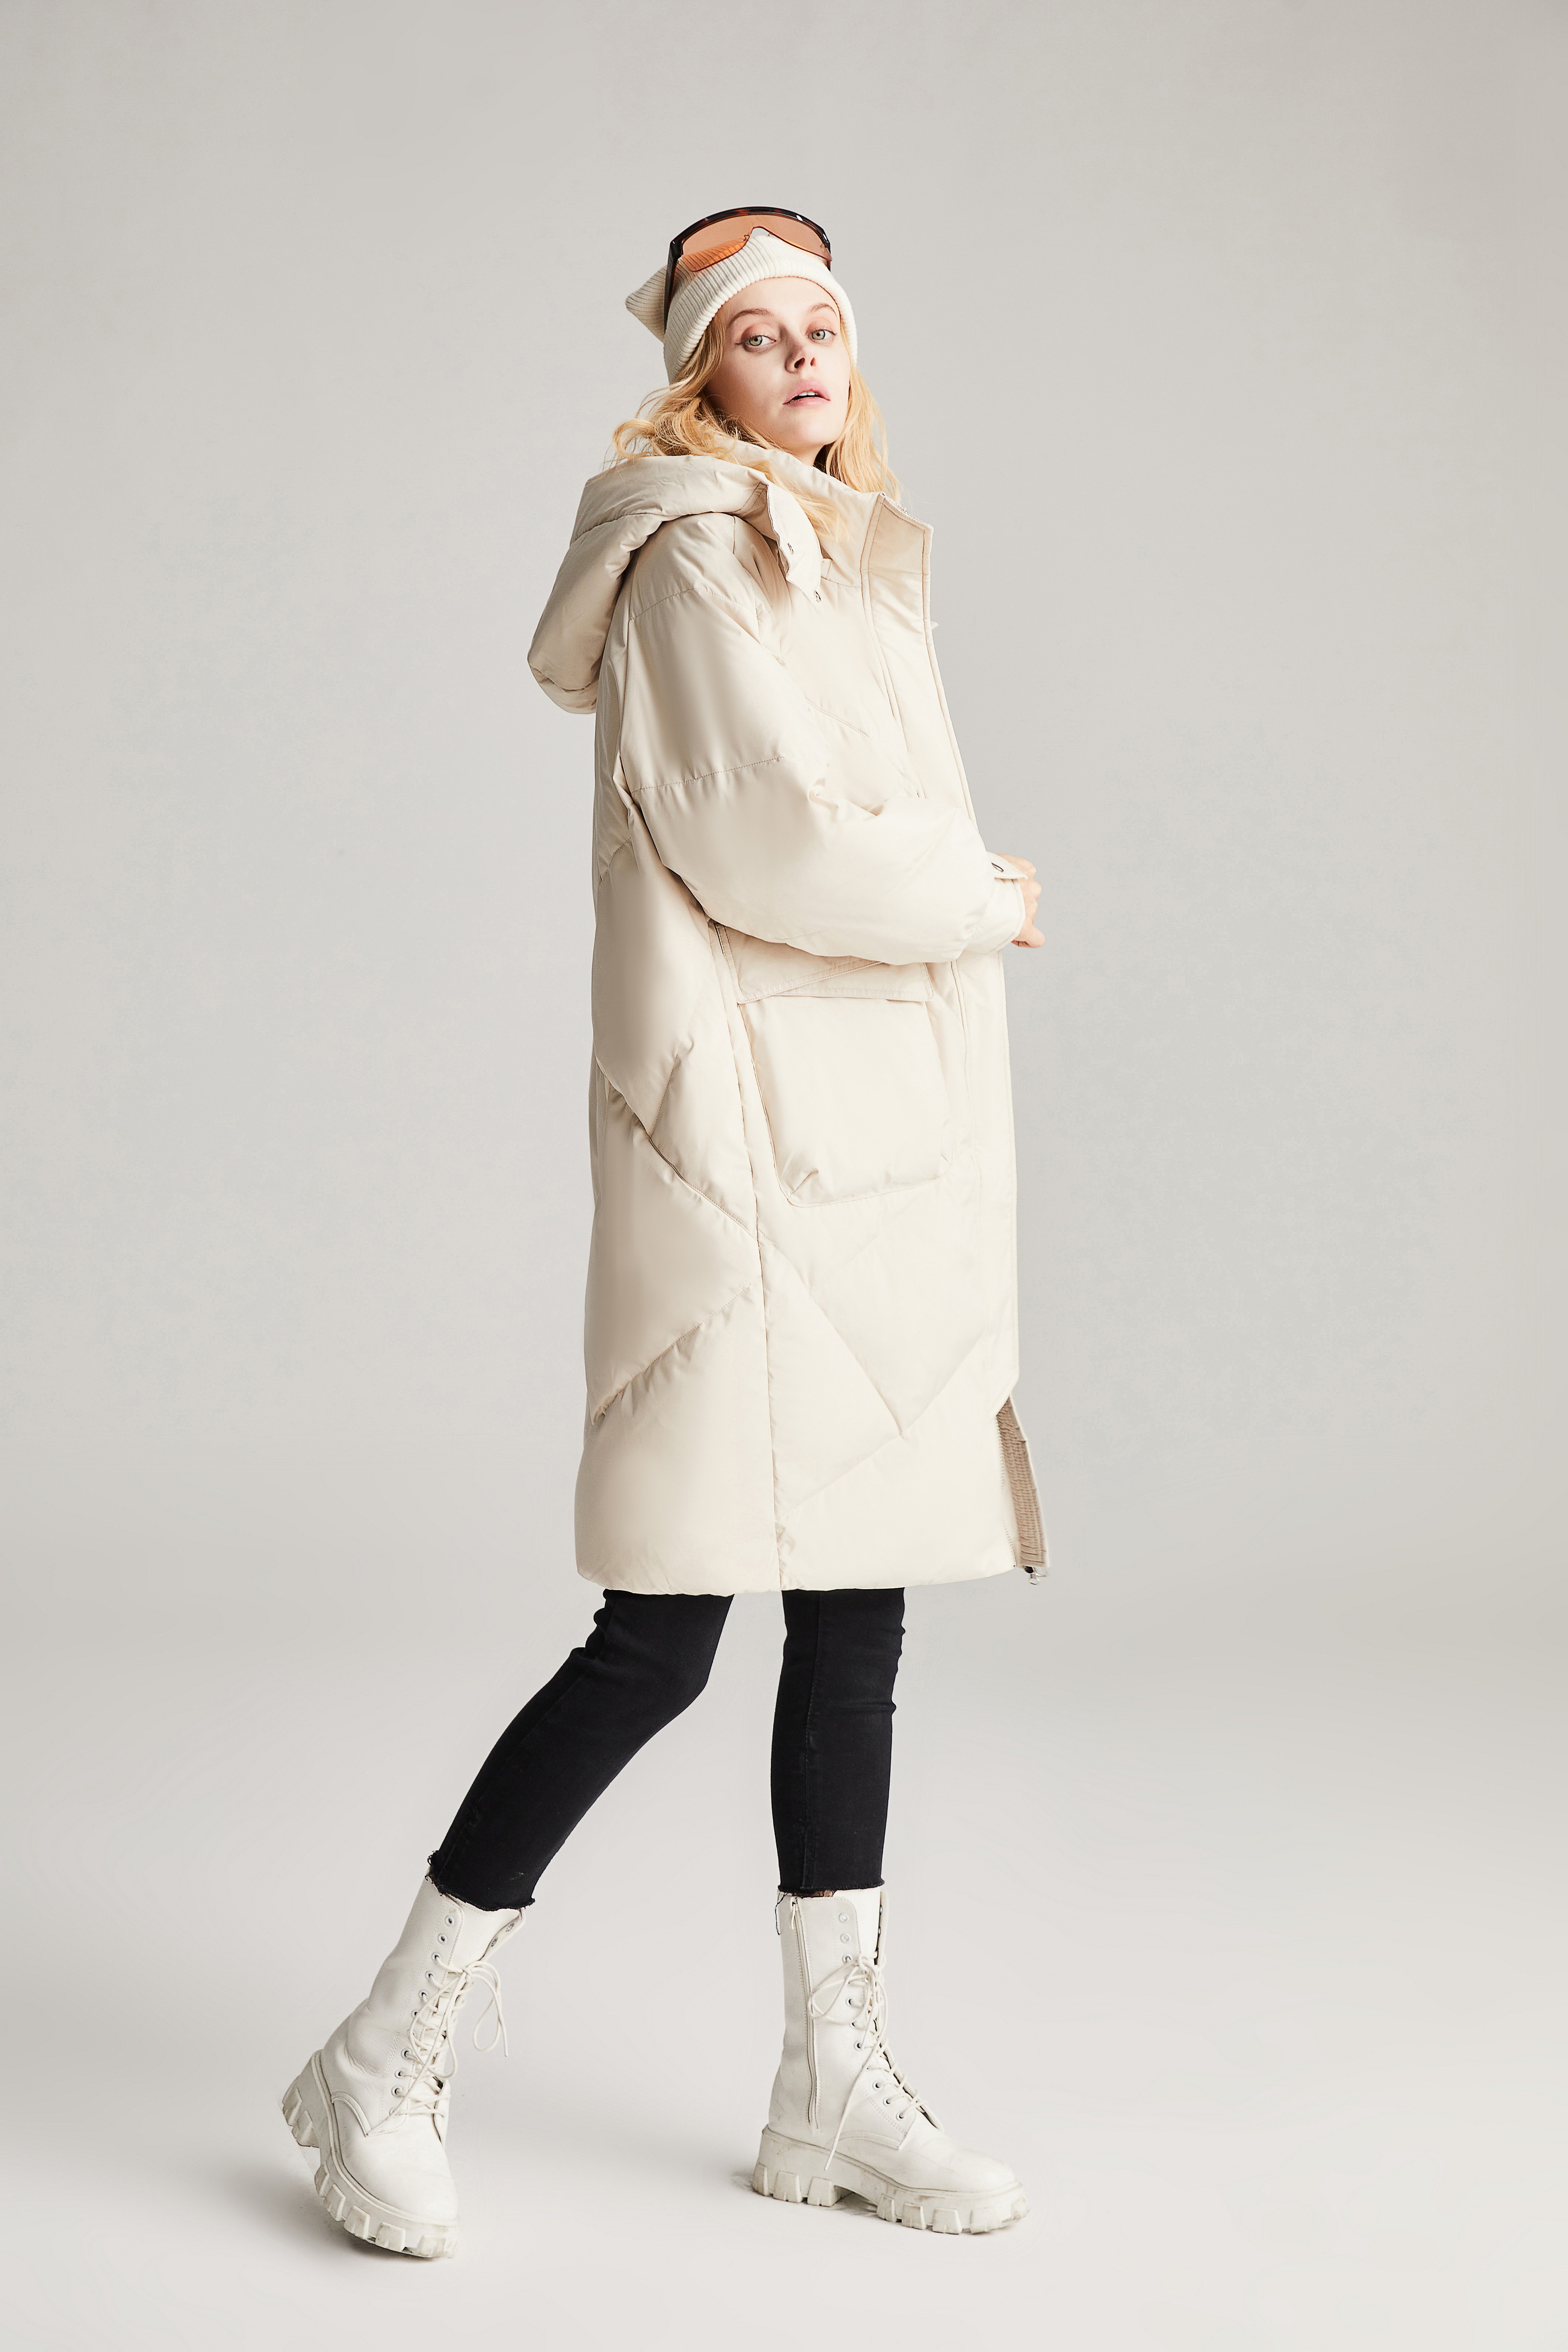 What are the differences between down coats and cotton coats